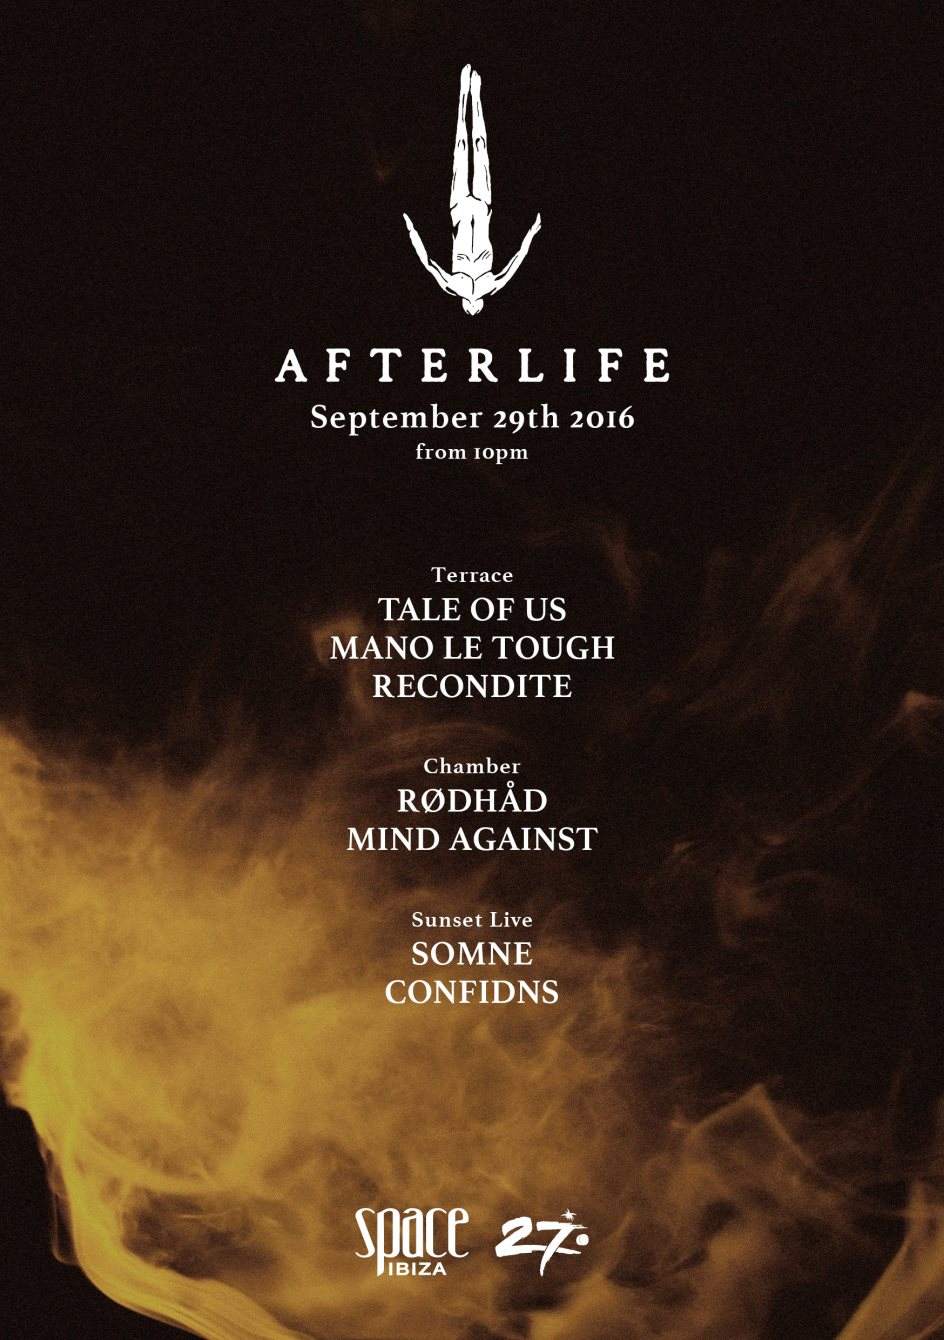 Afterlife - フライヤー表